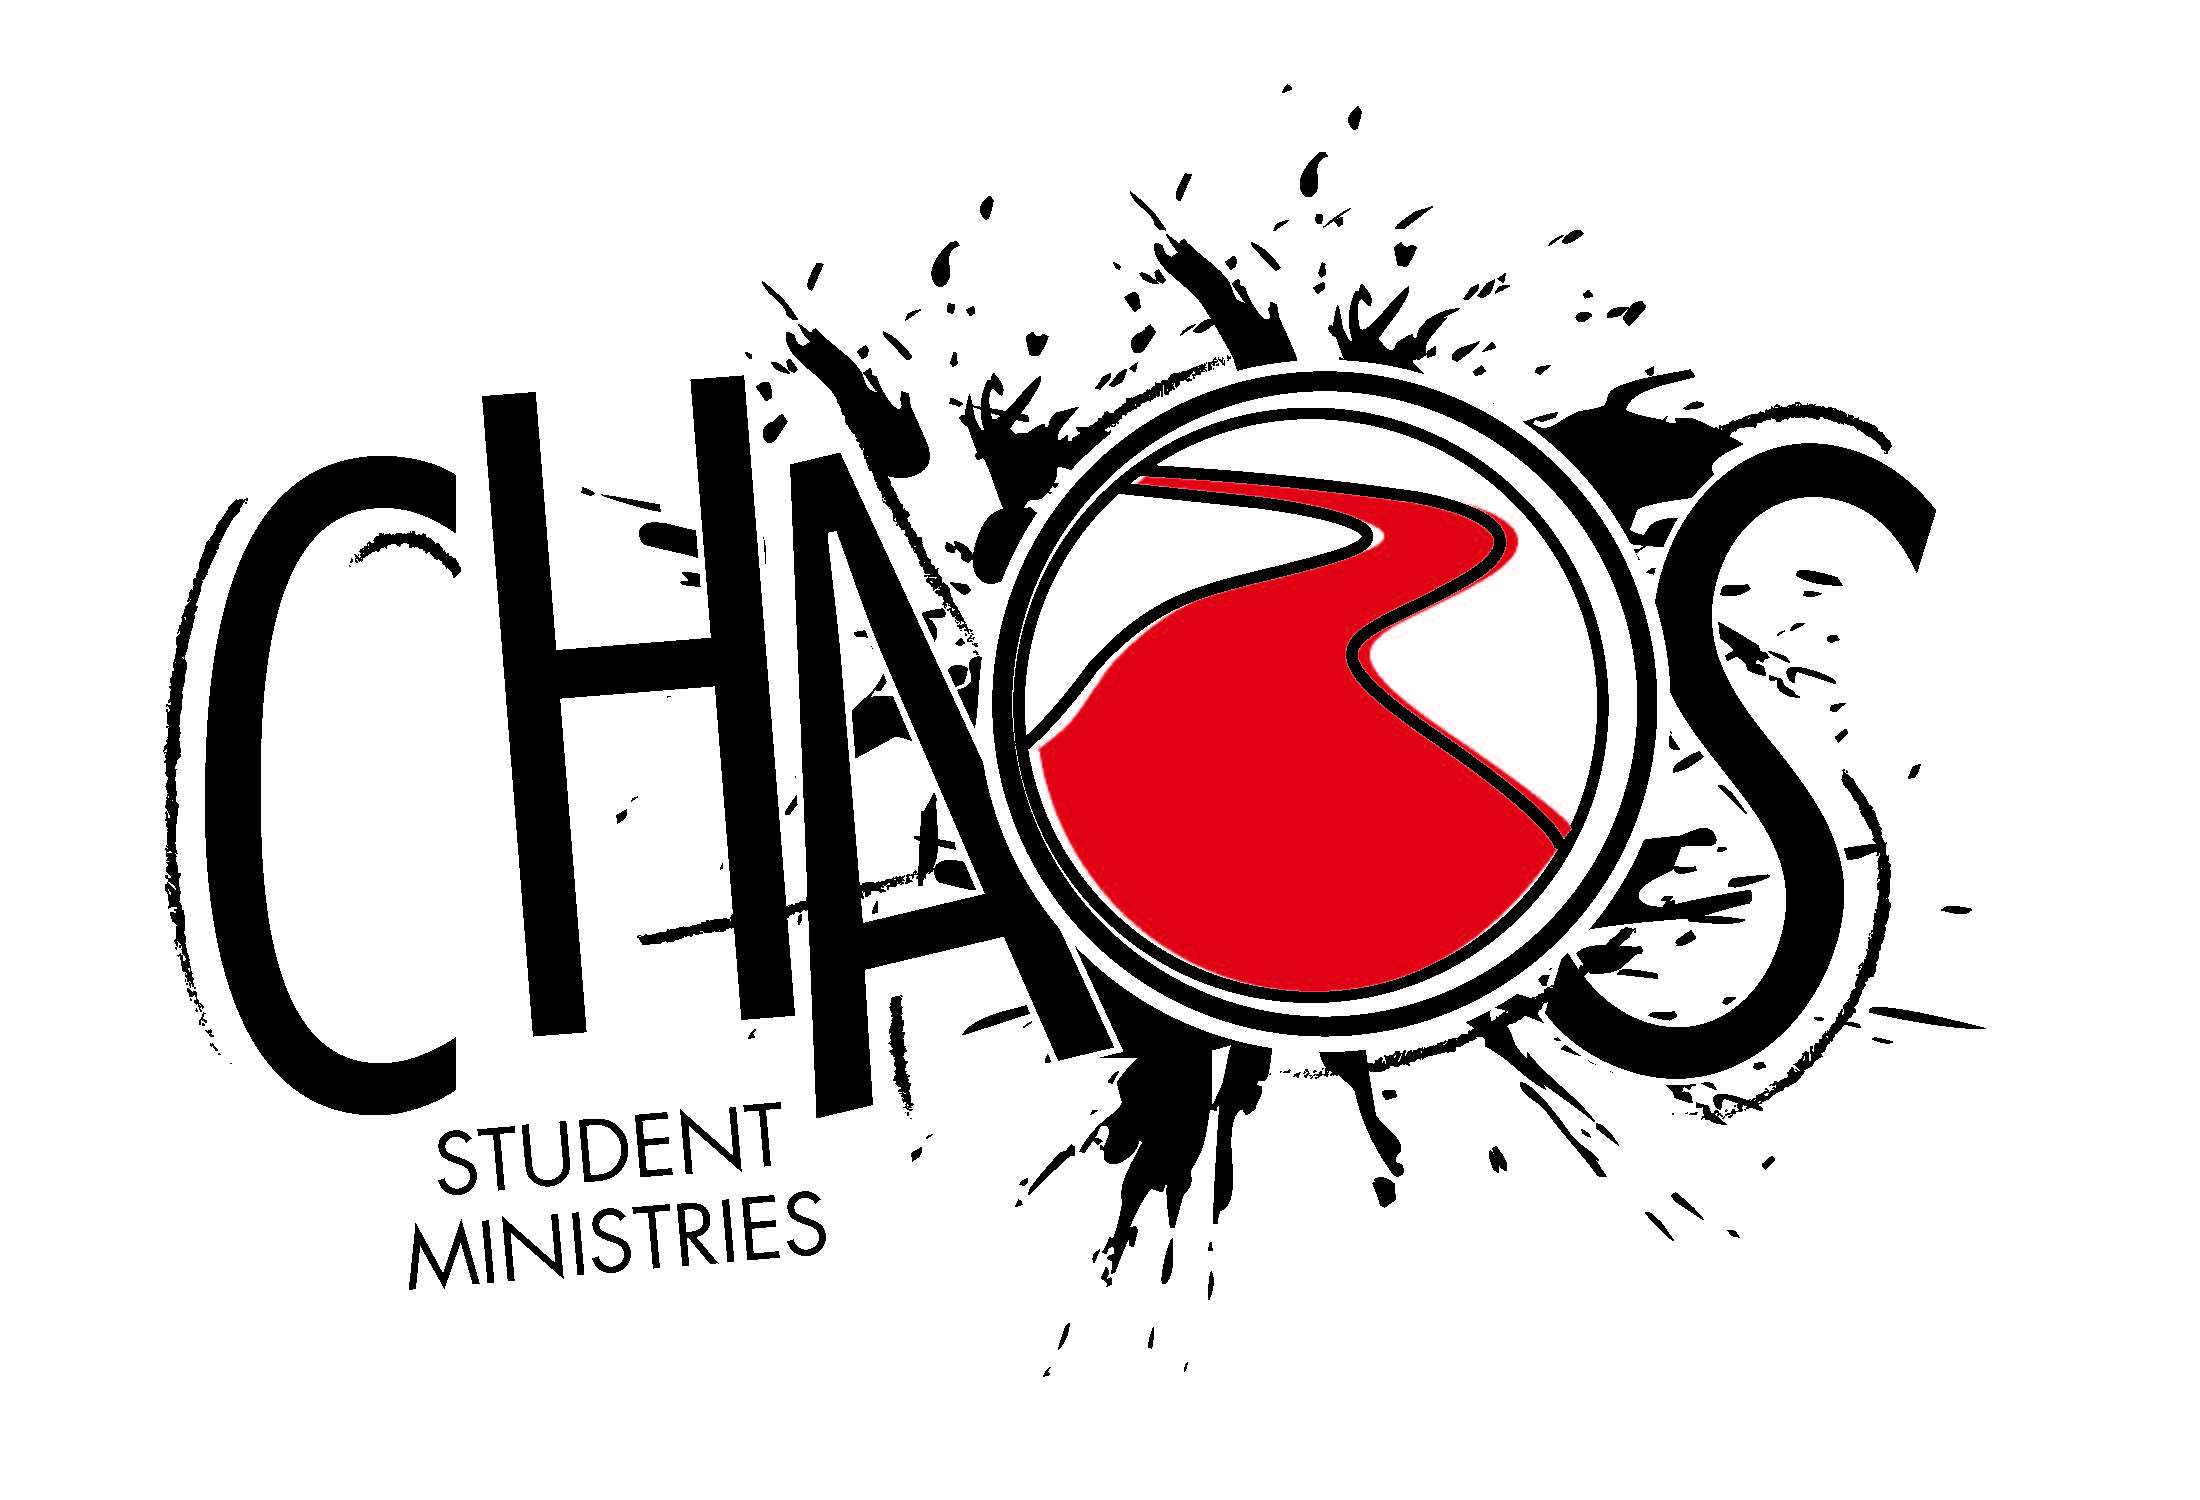 Chaos Student Ministries